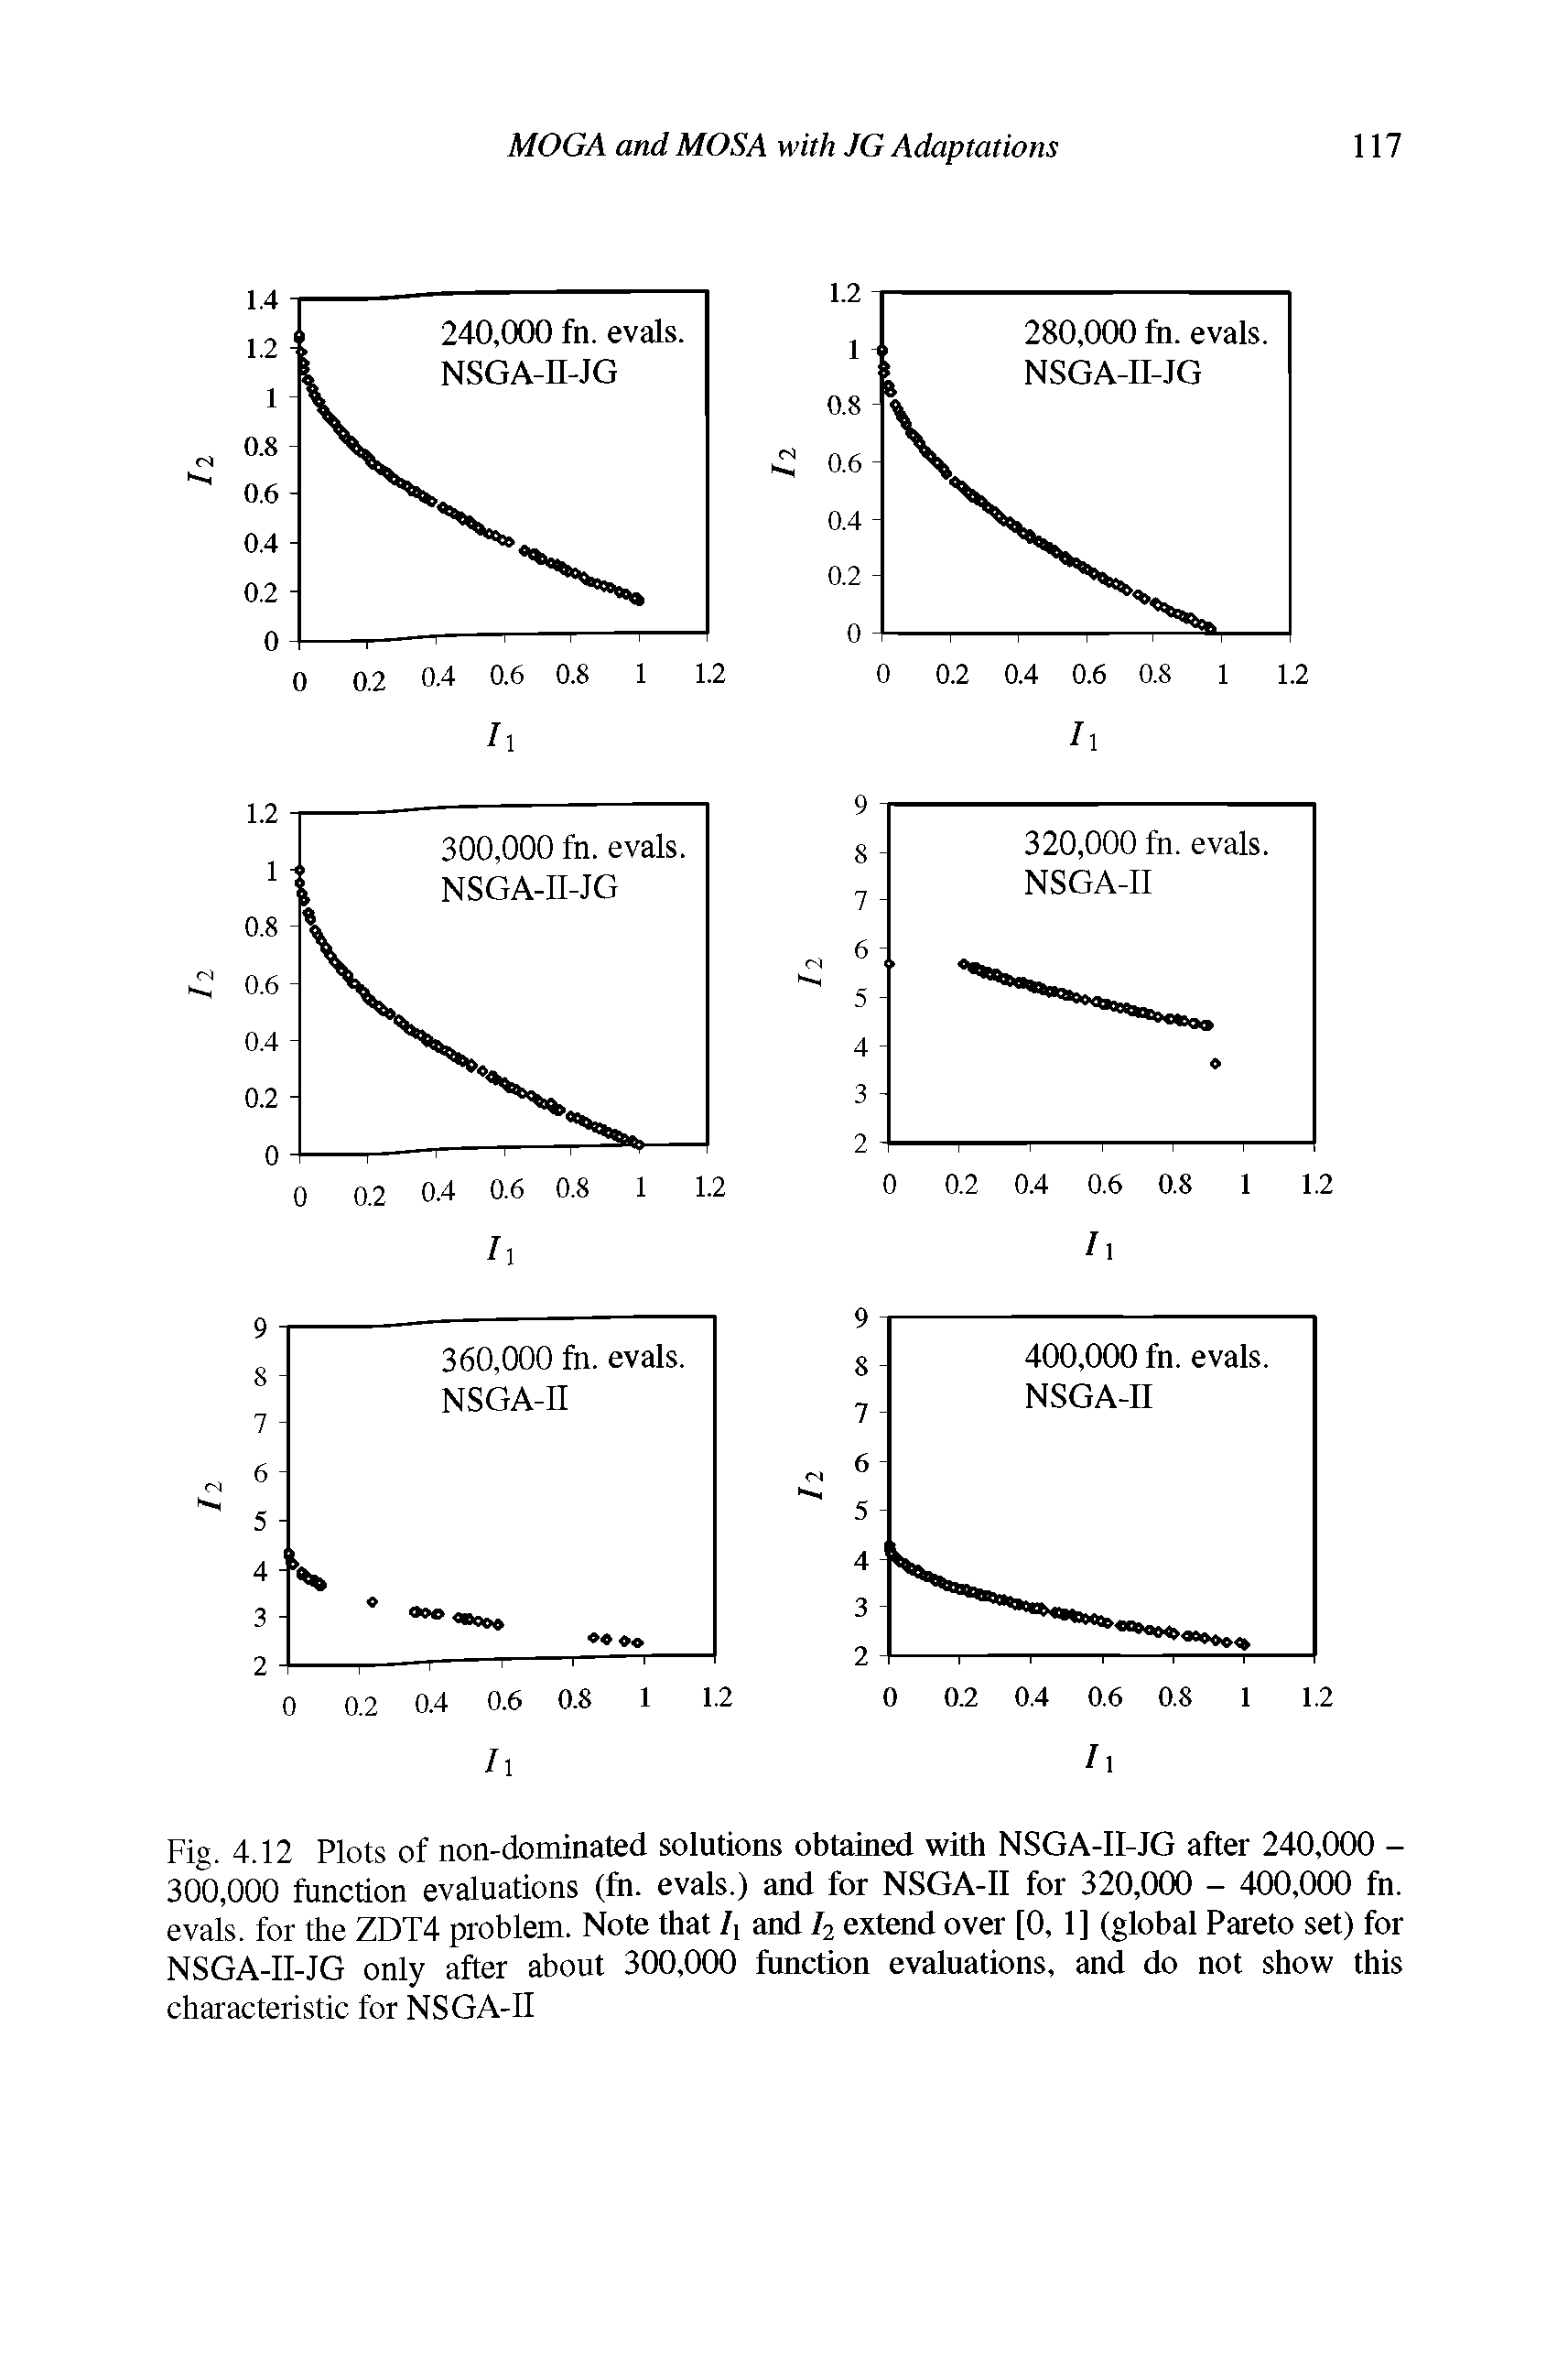 Fig. 4.12 Plots of non-dominated solutions obtained with NSGA-II-JG after 240,000 -300,000 function evaluations (fn. evals.) and for NSGA-II for 320,000 - 400,000 fn. evals. for the ZDT4 problem. Note that /j and I2 extend over [0, 1] (global Pareto set) for NSGA-II-JG only after about 300,000 function evaluations, and do not show this characteristic for NSGA-II...